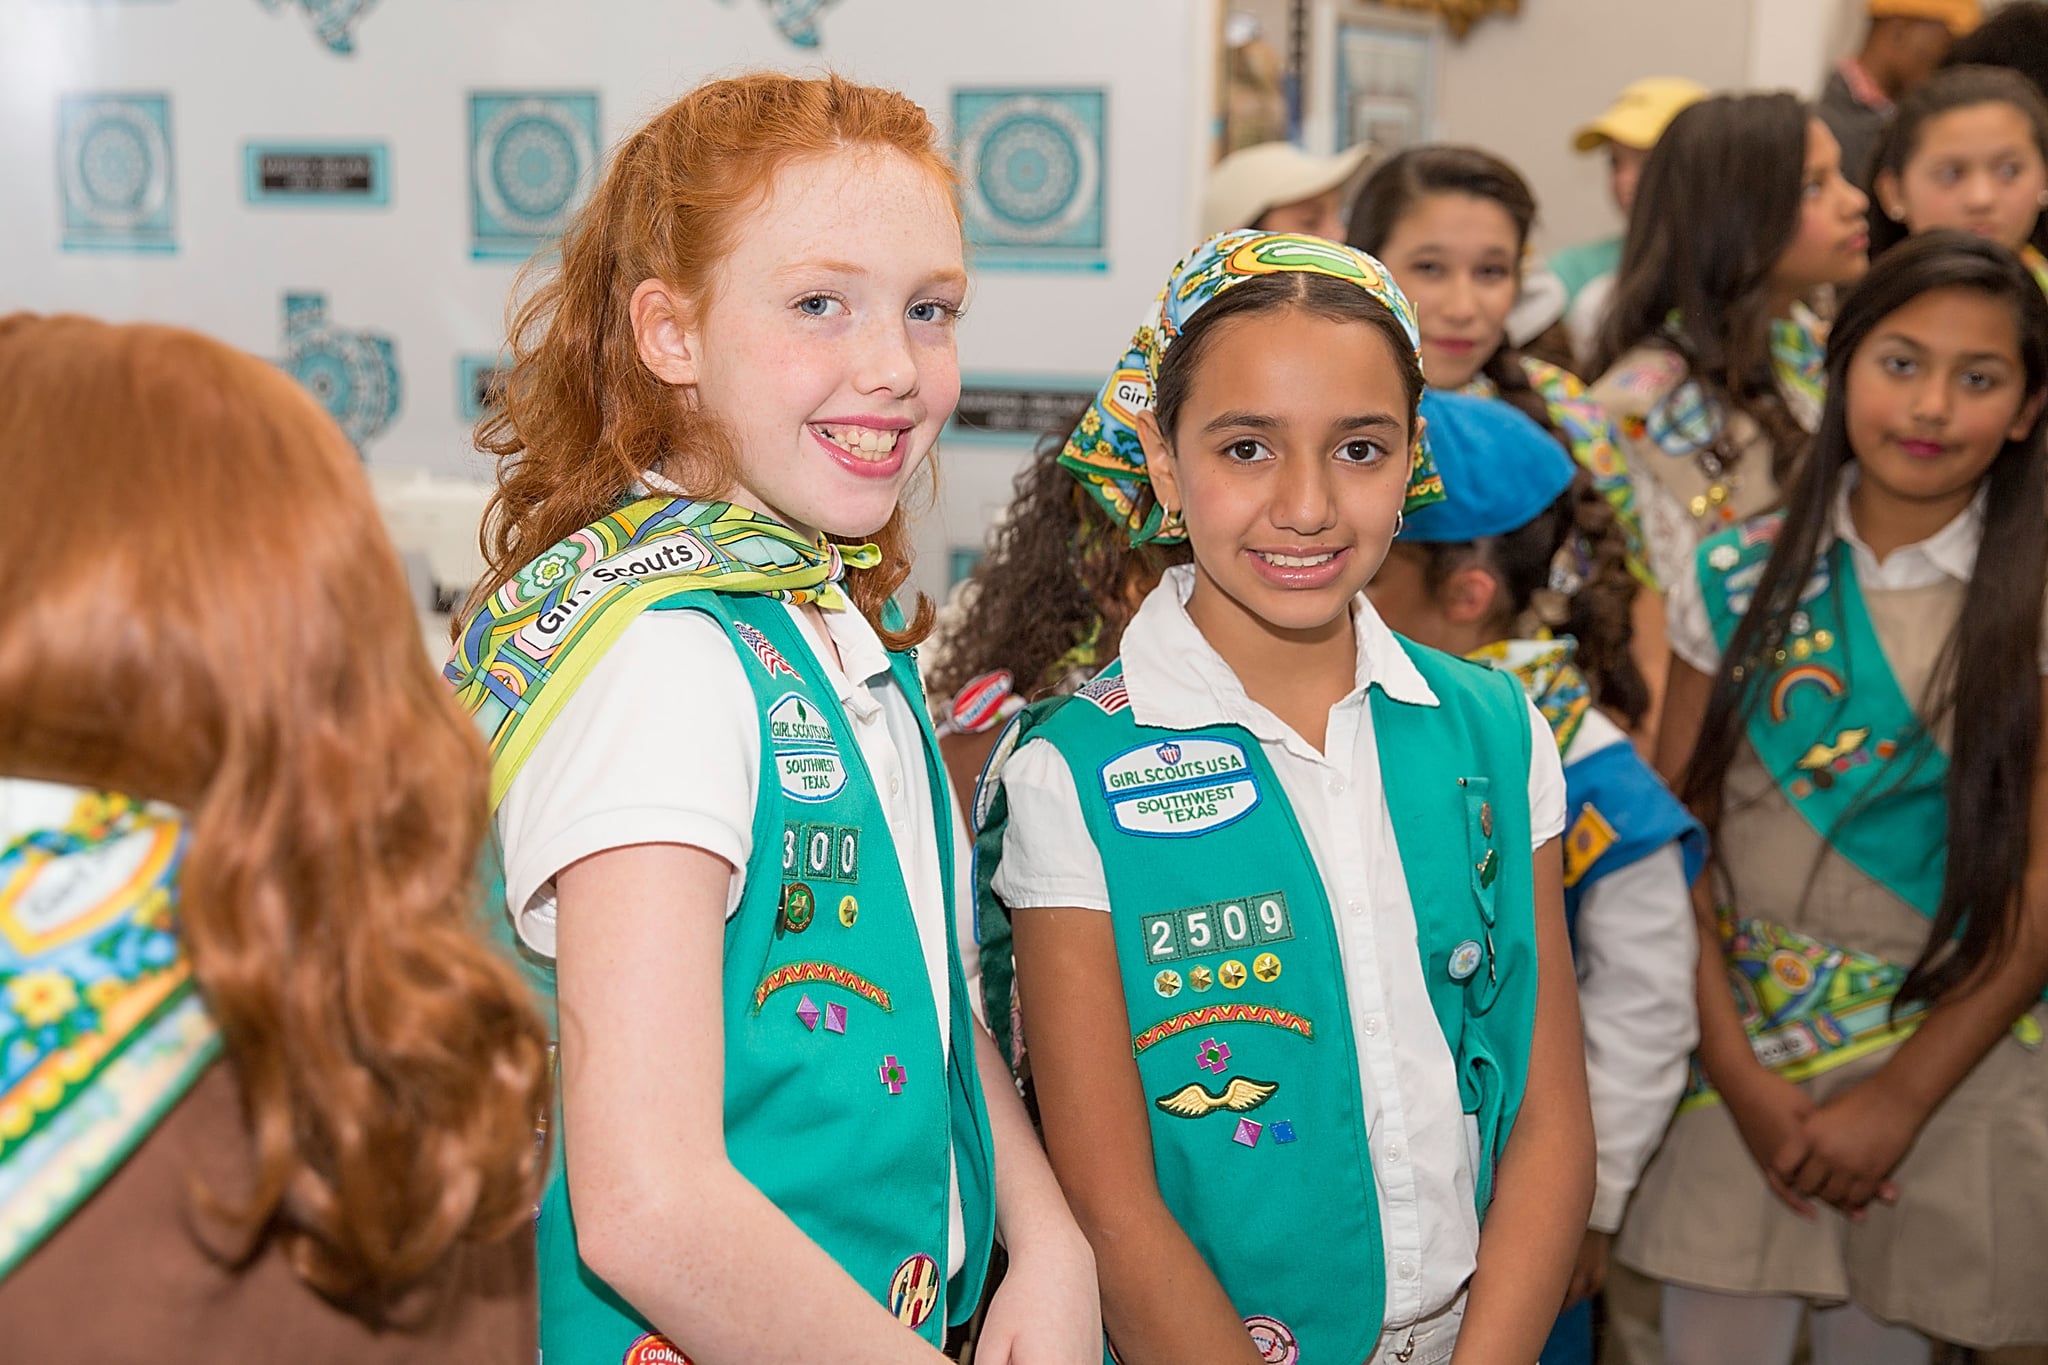 Girl Scouts Sexist Prizes Popsugar Moms 